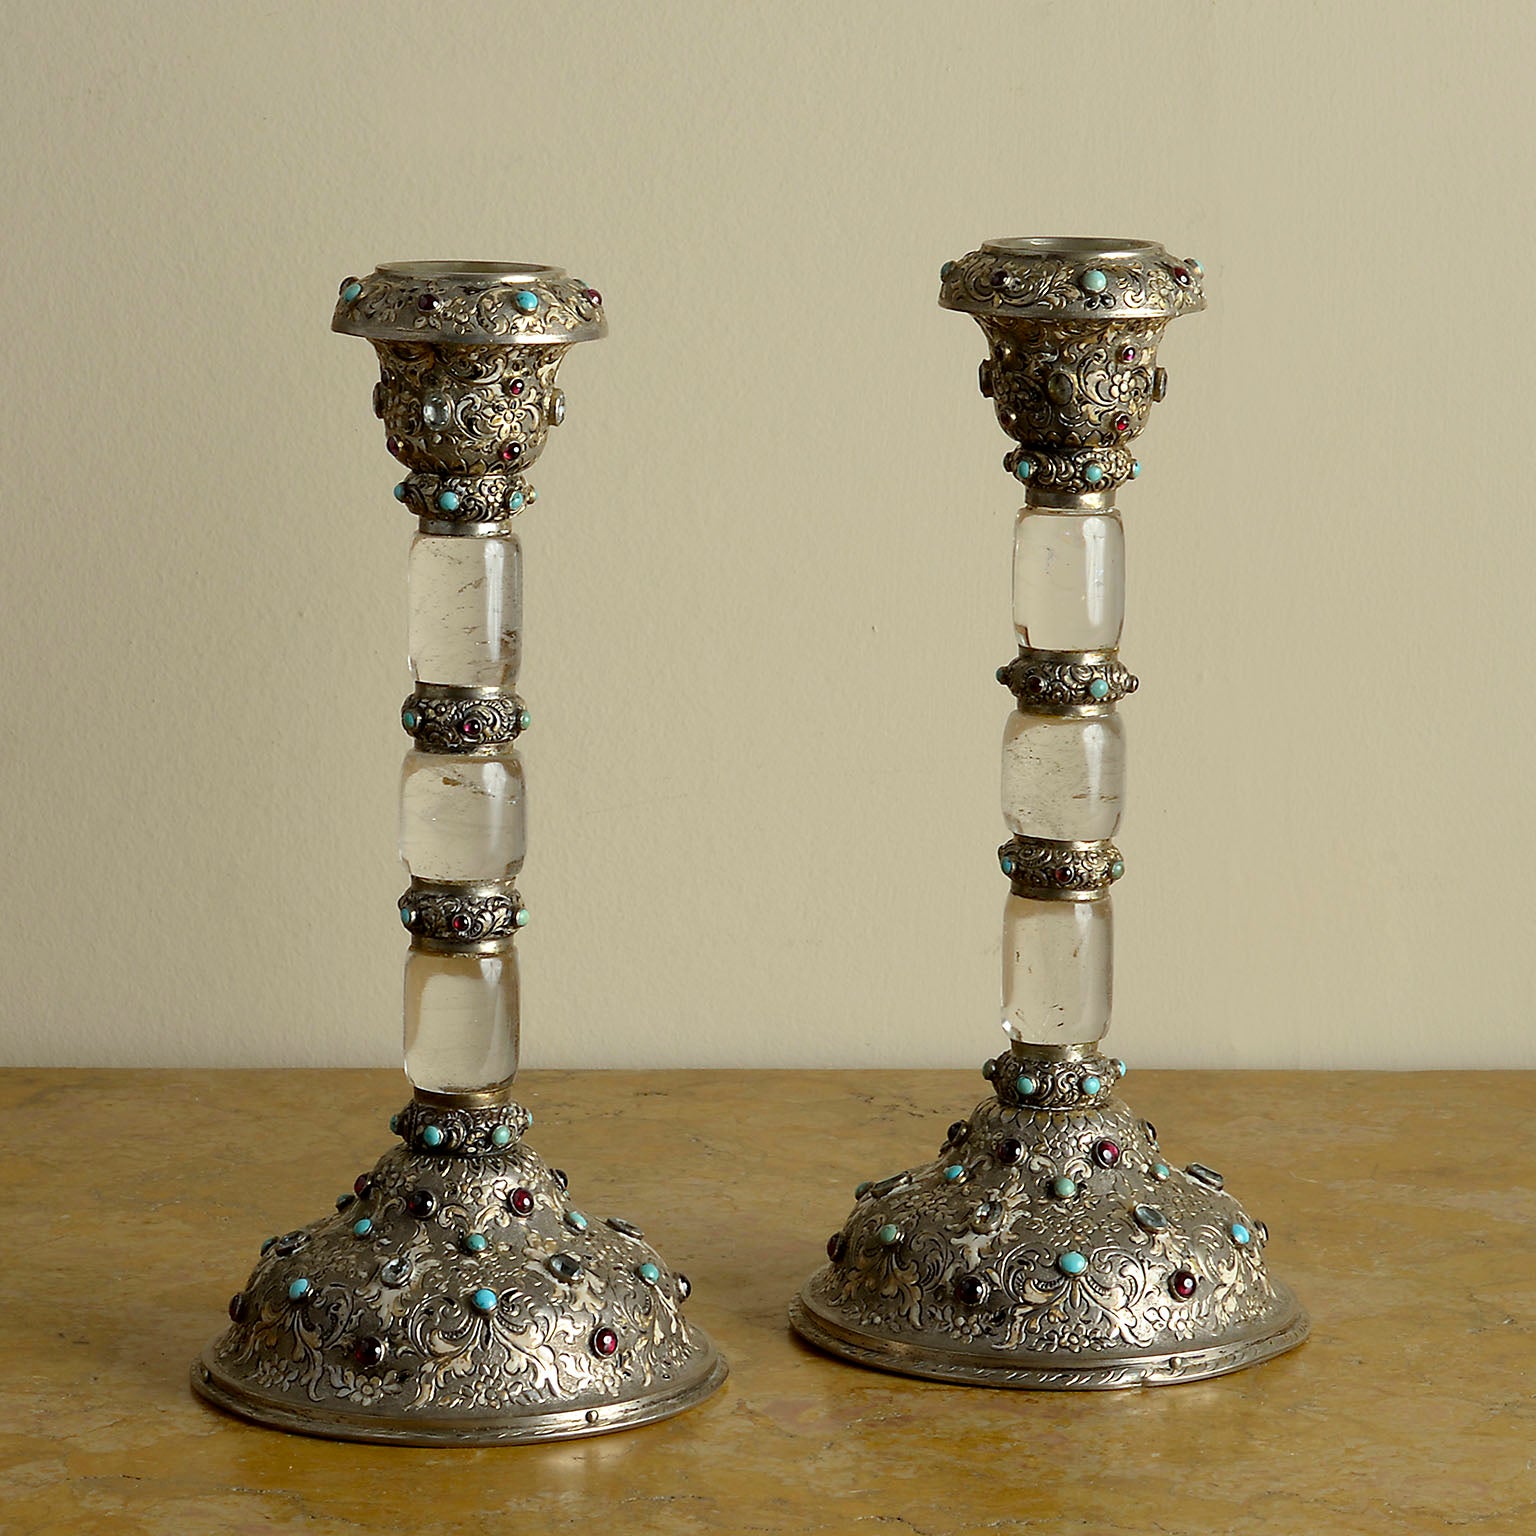 A Pair of Silver-Mounted and Gem Set Rock Crystal Candlesticks